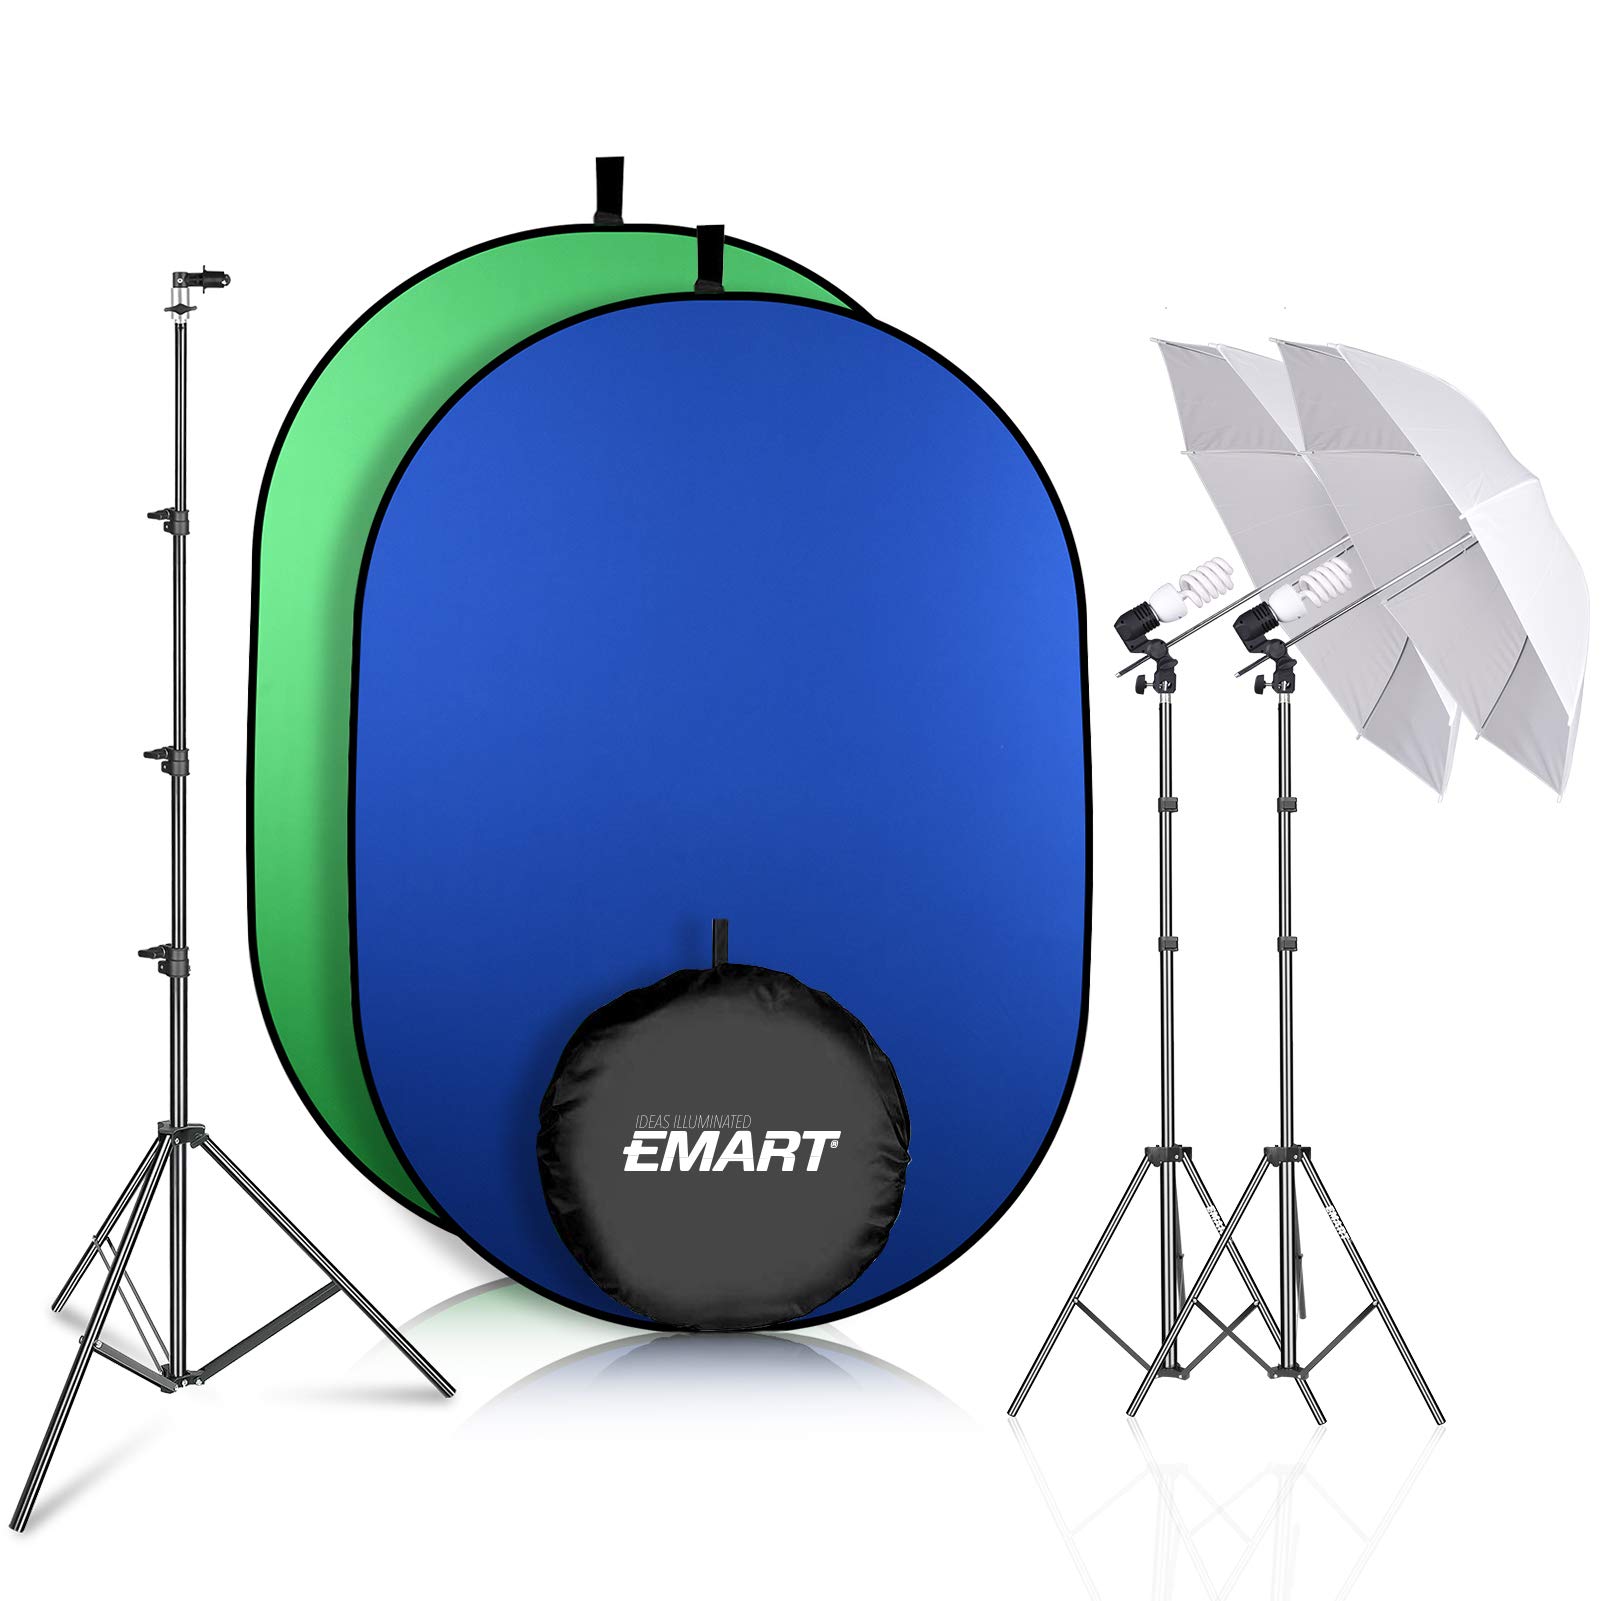 EMART Green Screen Kit, Pop Up Collapsible Chromakey Blue Backdrop Setup with Stand Photography Lighting Umbrella, Studio Lights Equipment with Por...